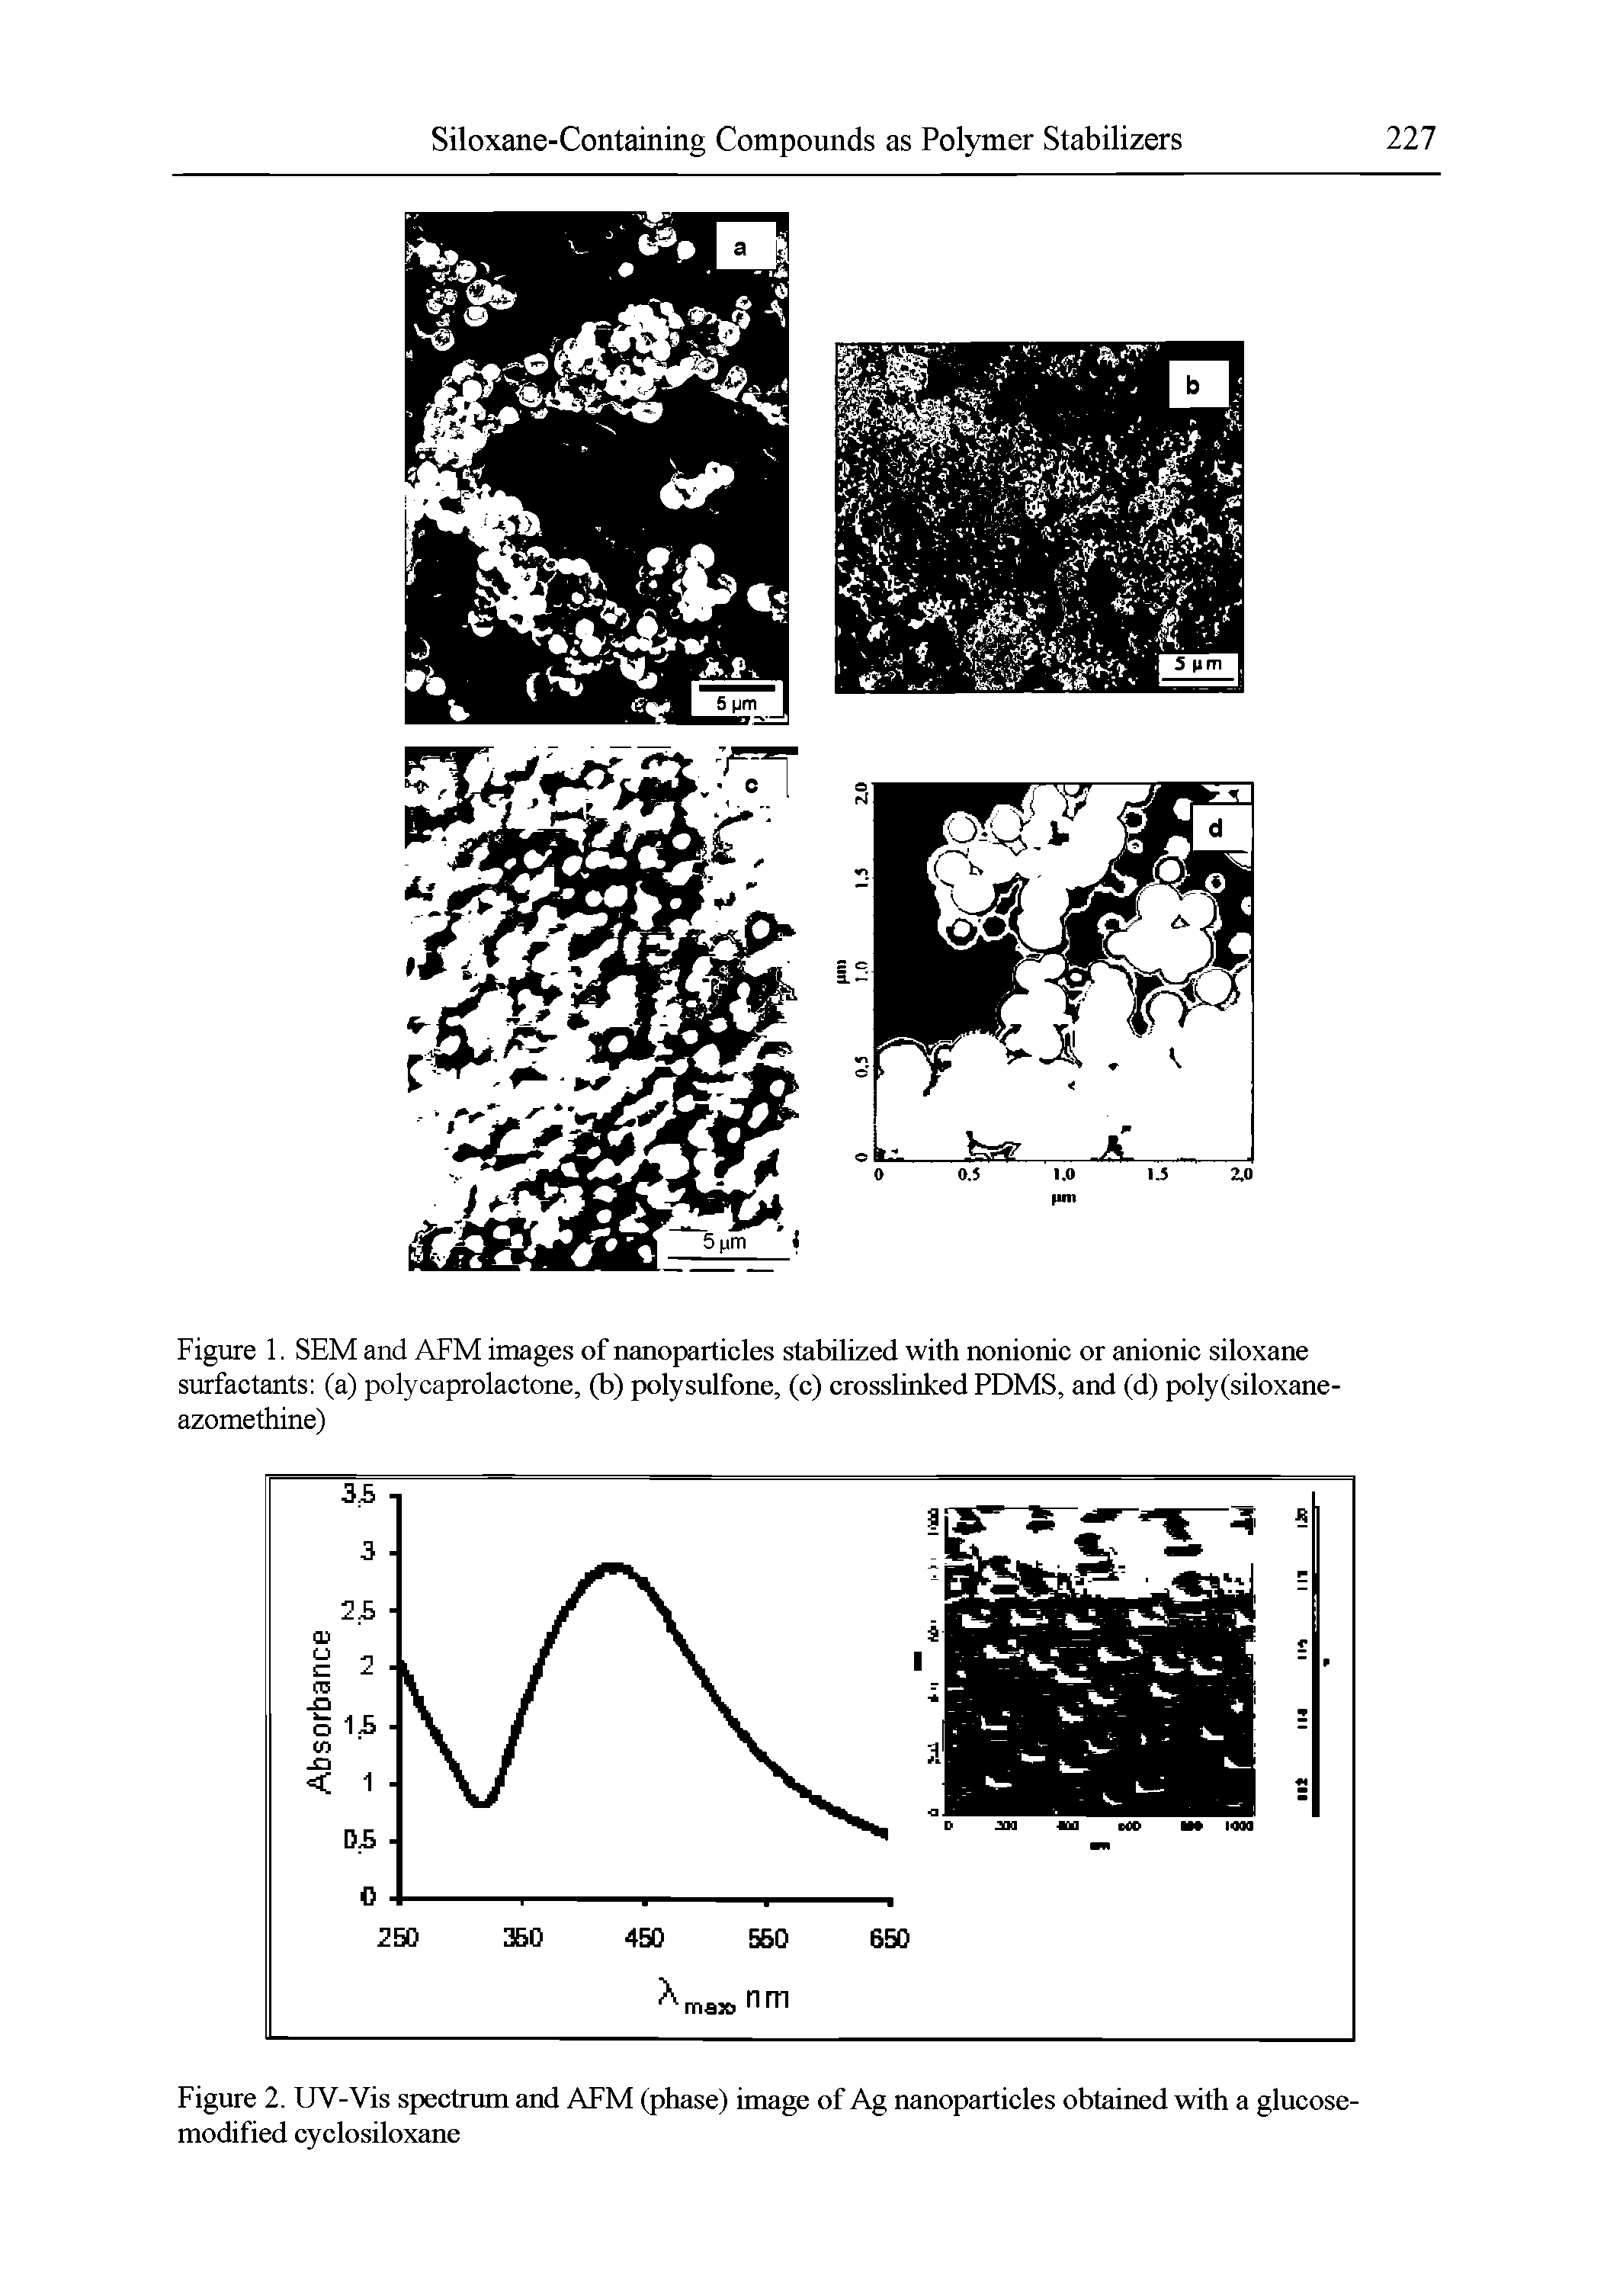 Figure 1. SEM and AFM images of nanoparticles stabilized with nonionic or anionic siloxane surfactants (a) polycaprolactone, (b) polysulfone, (c) crosslinked PDMS, and (d) poly(siloxane-azomethine)...